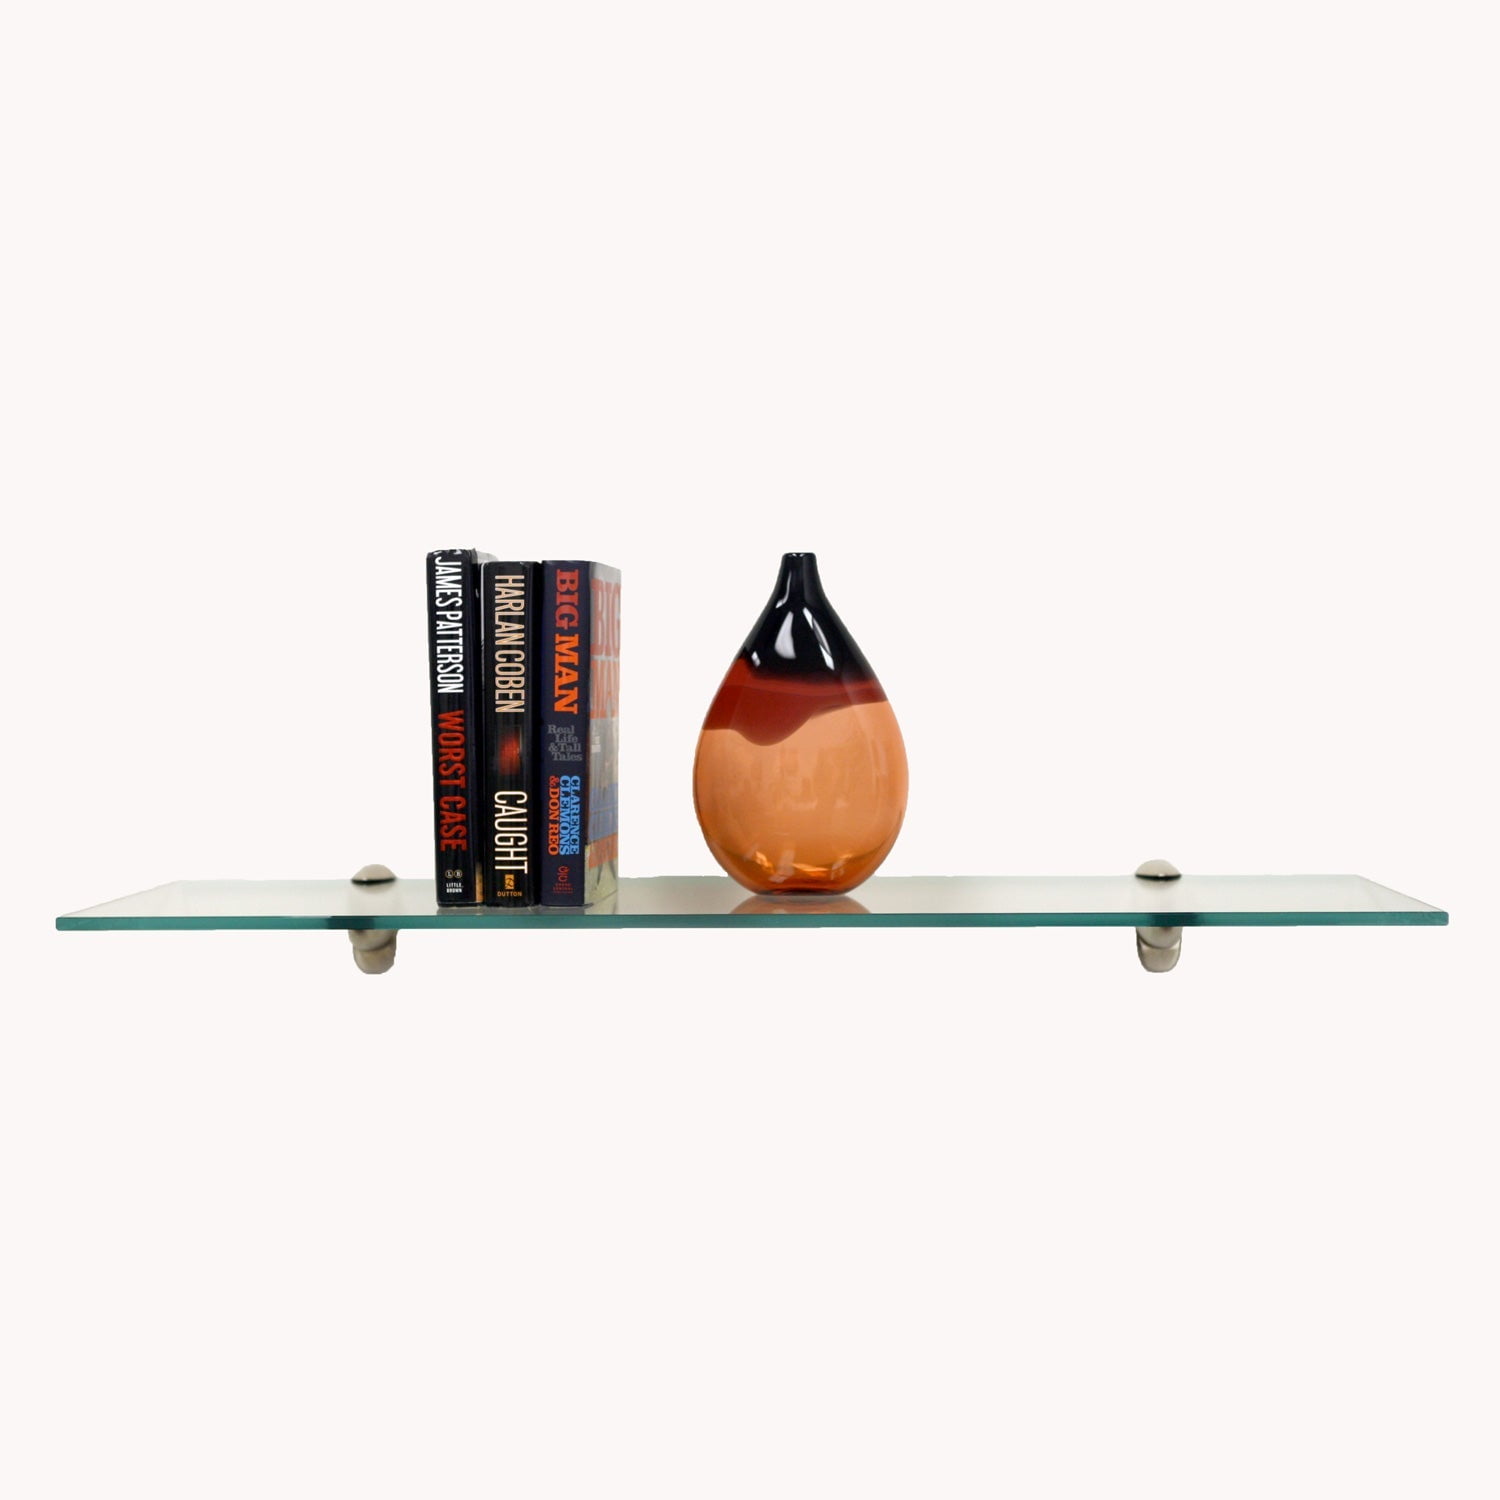 8" X 36" Heron Floating Glass Shelves Brackets Included with Each Shelf  By Spancraft Glass